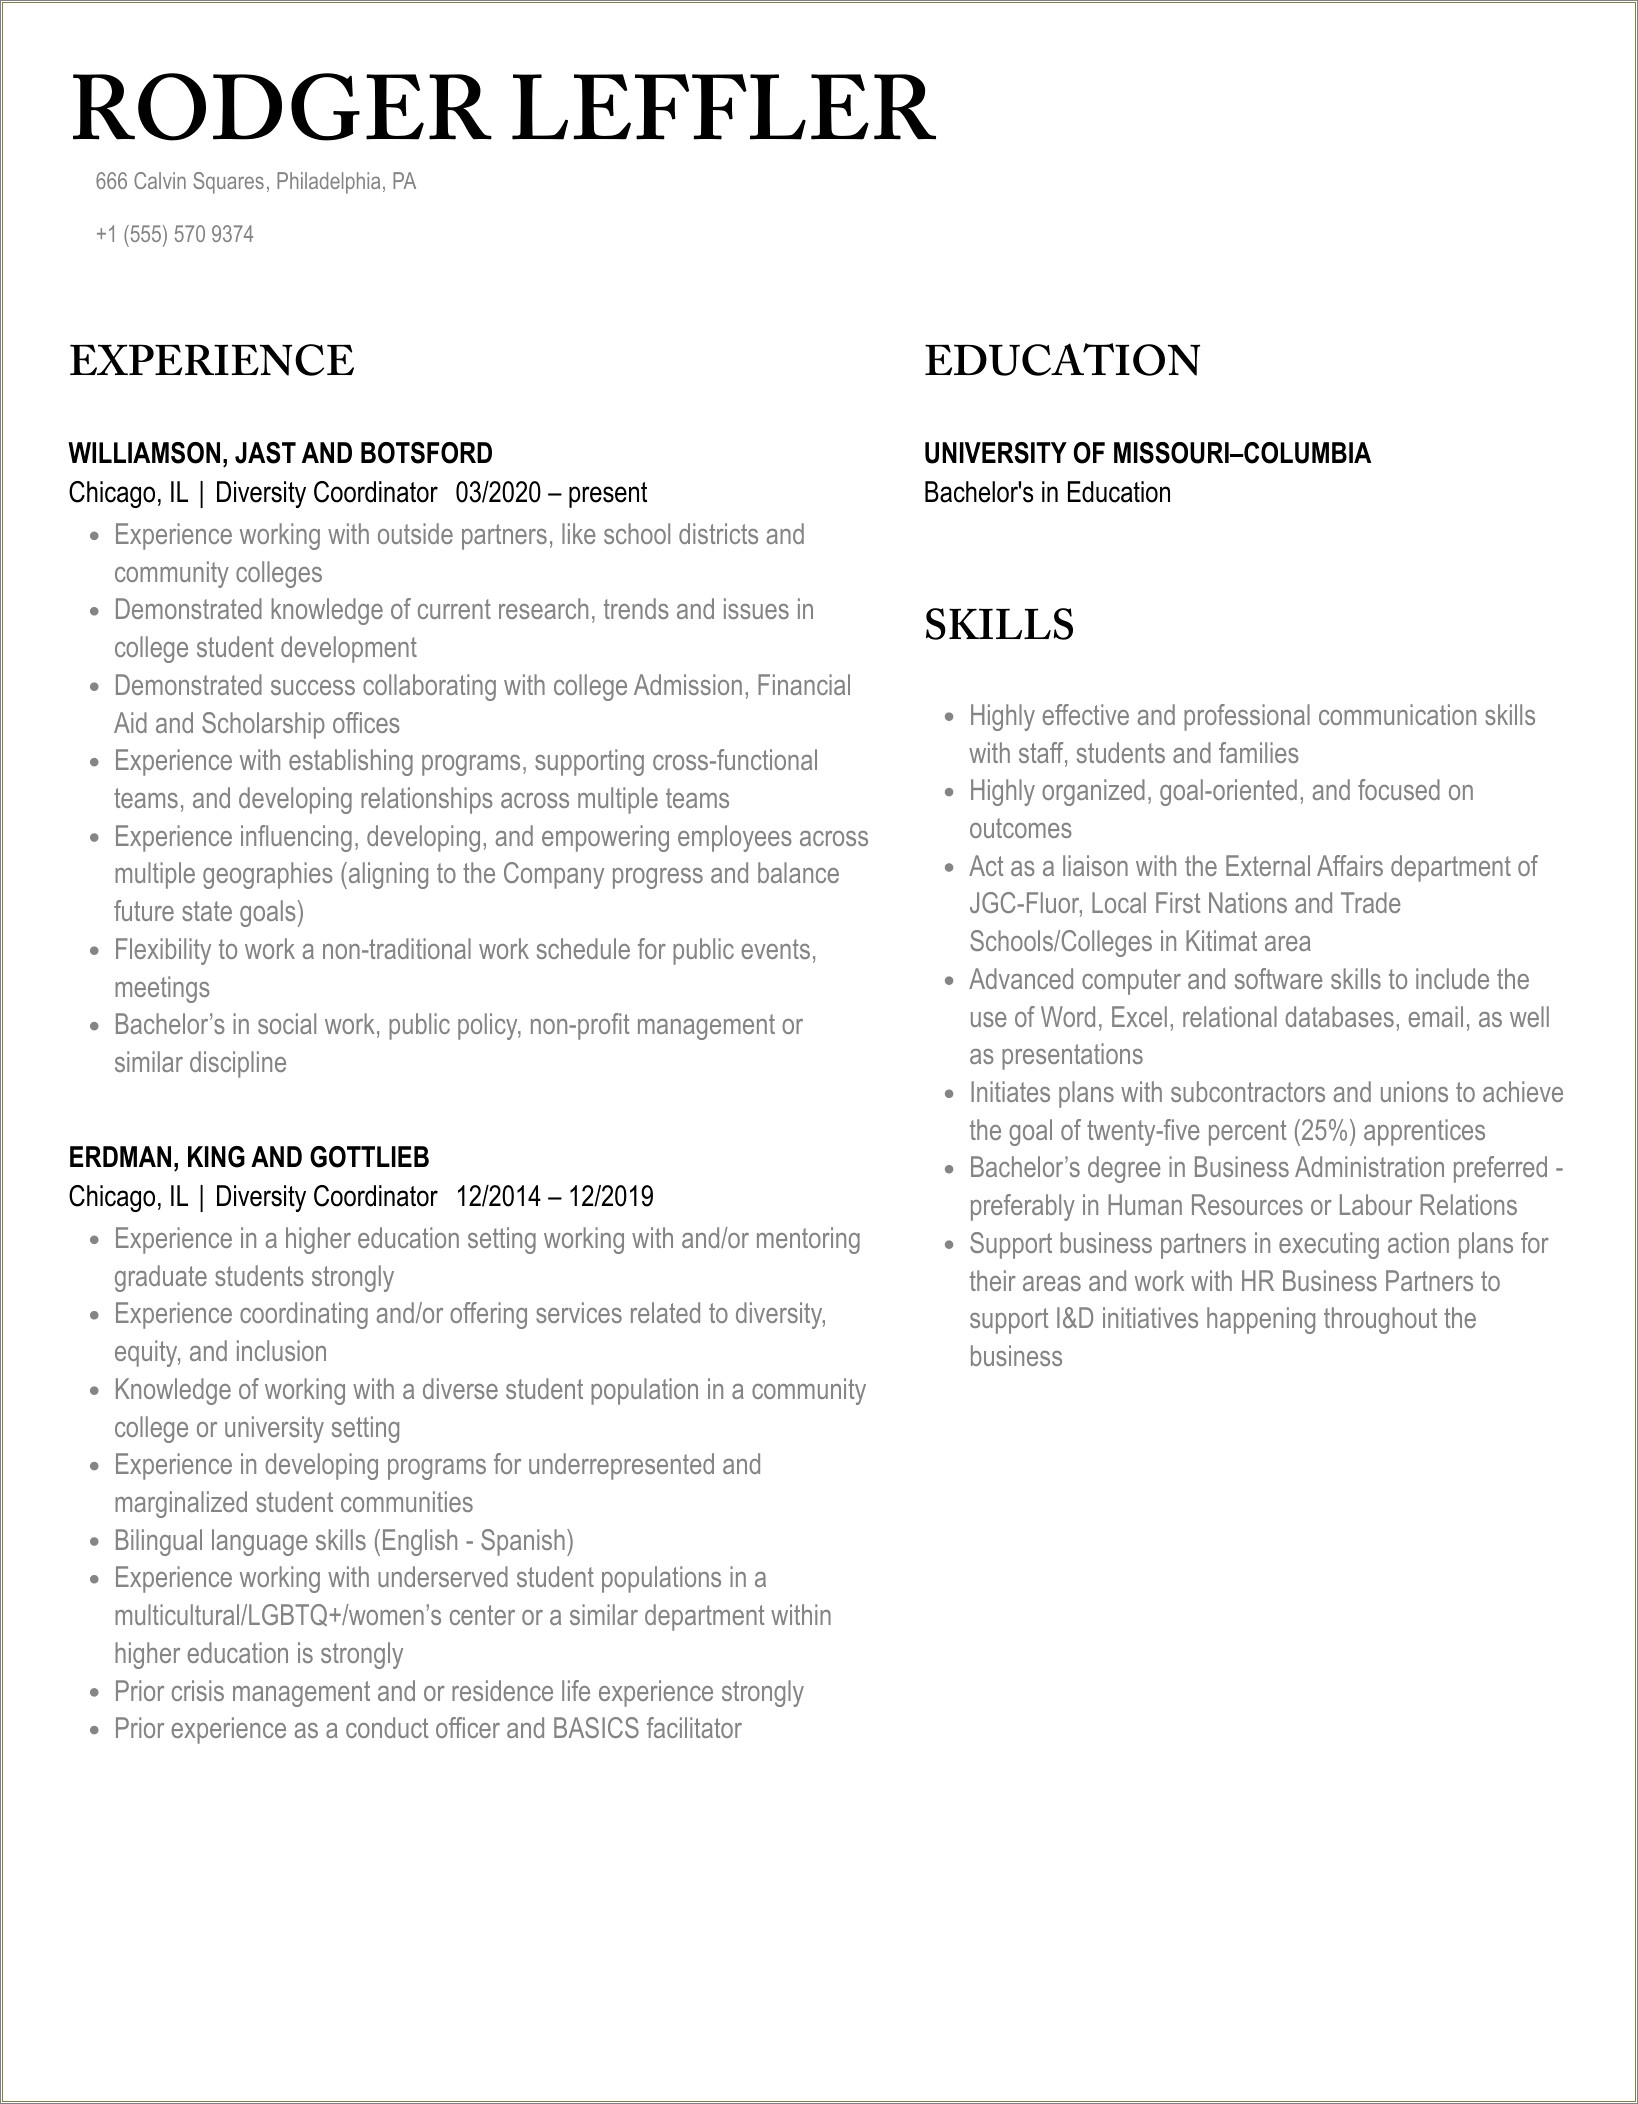 Diversity And Social Justice Experience For Resume